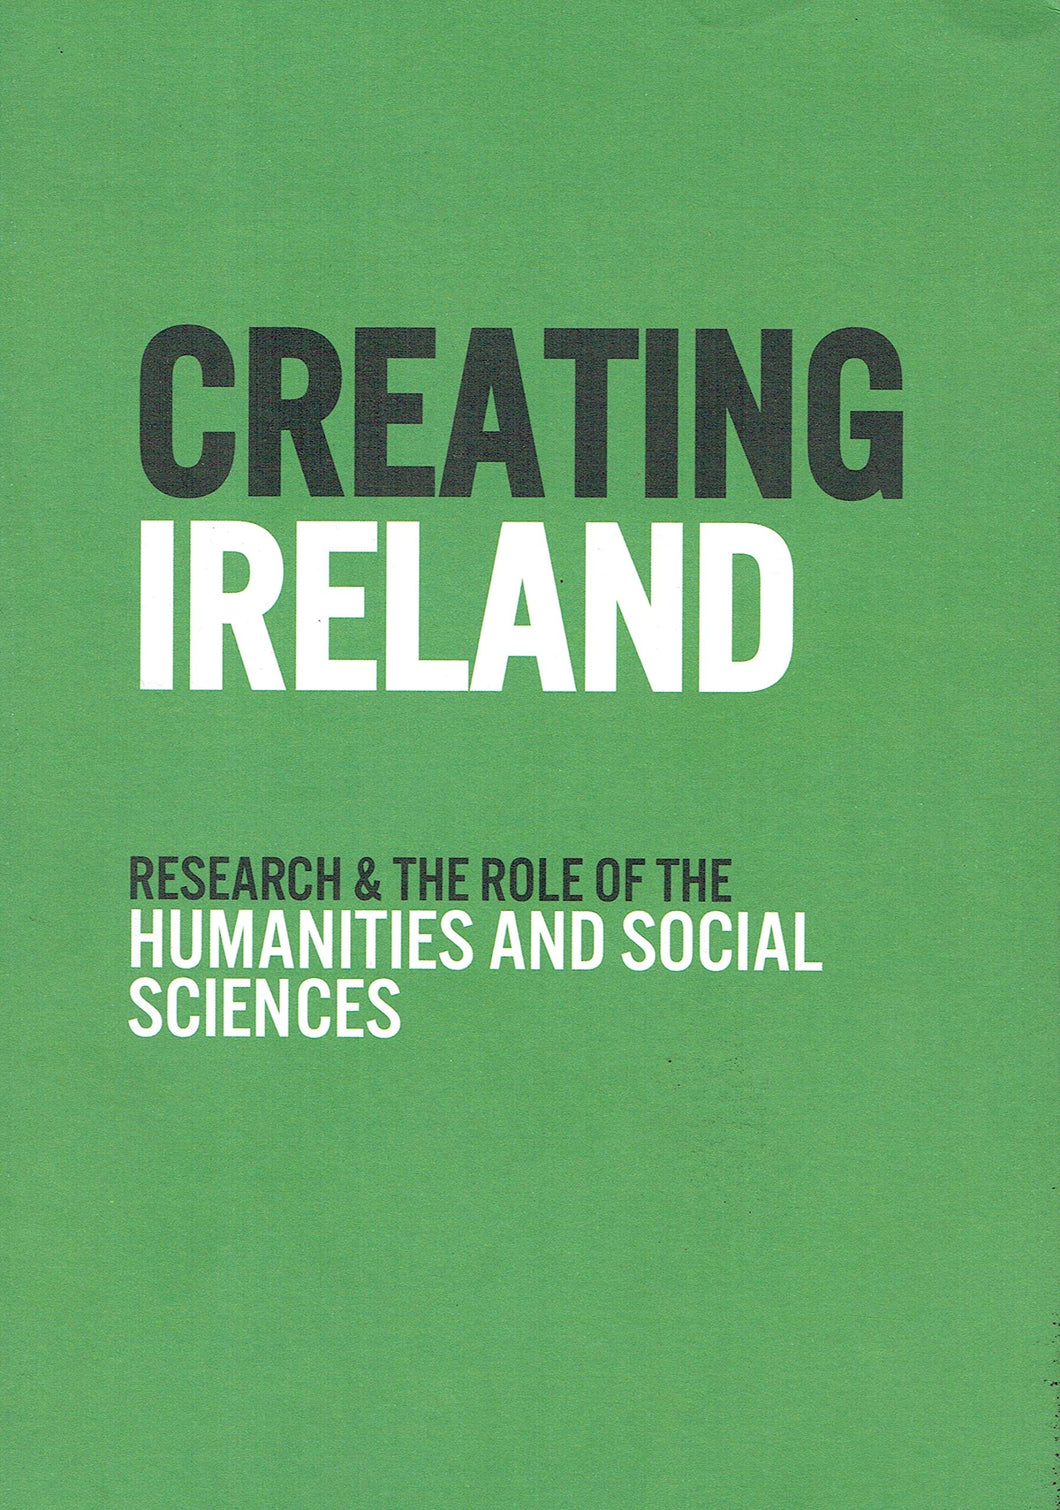 Creating Ireland: Research and the Role of the Humanities and Social Sciences